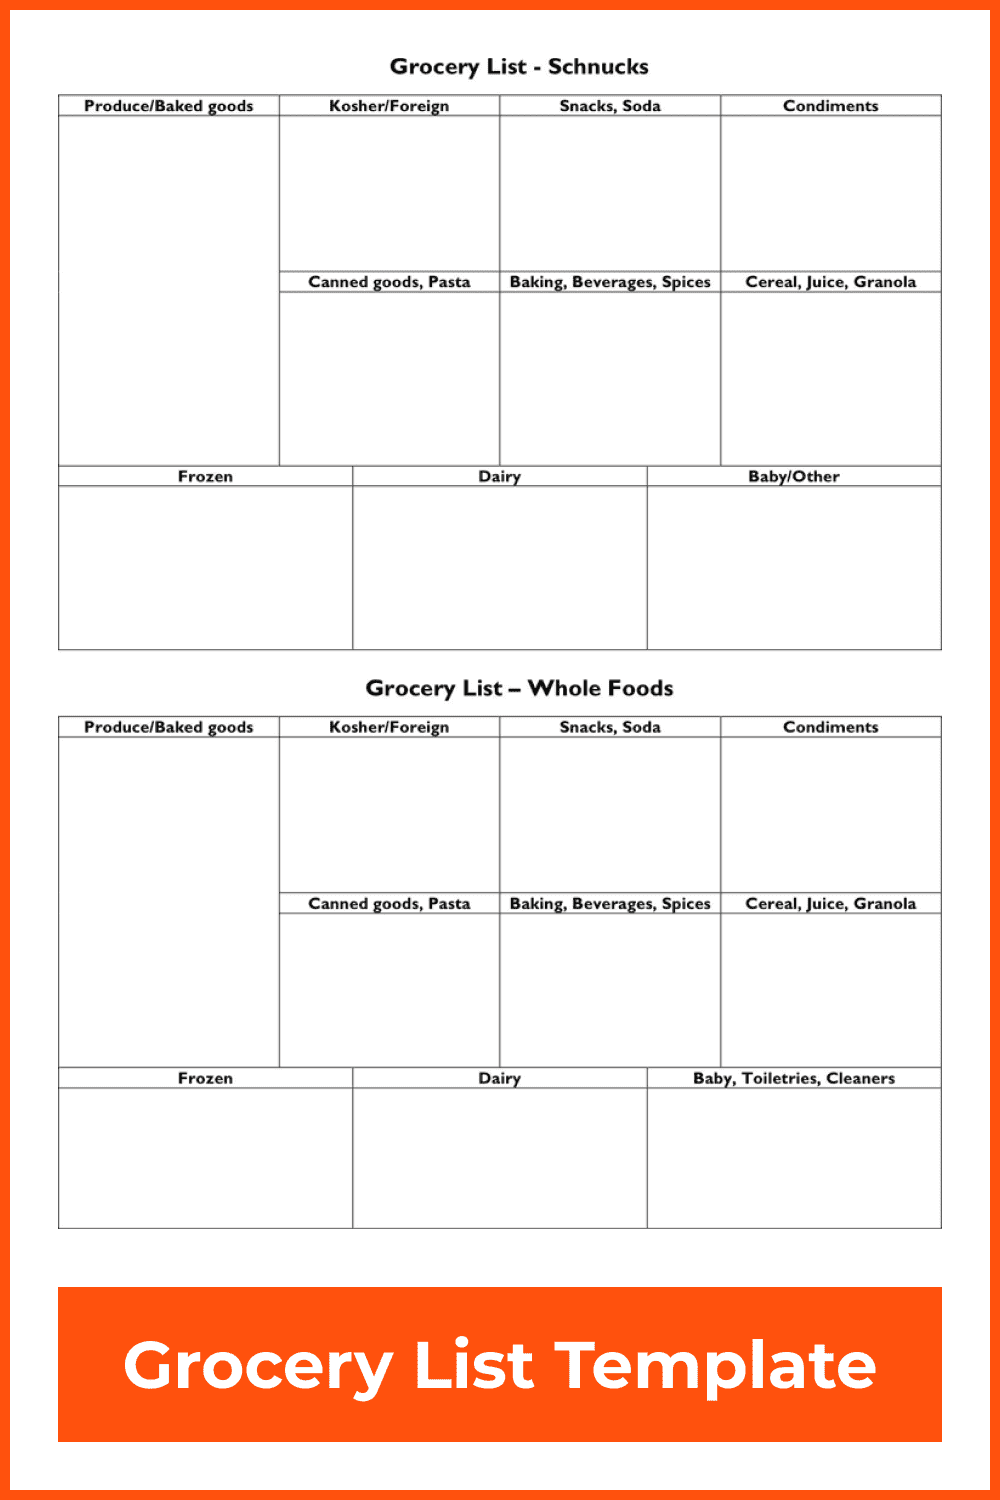 A clear and simple table for a meal plan.